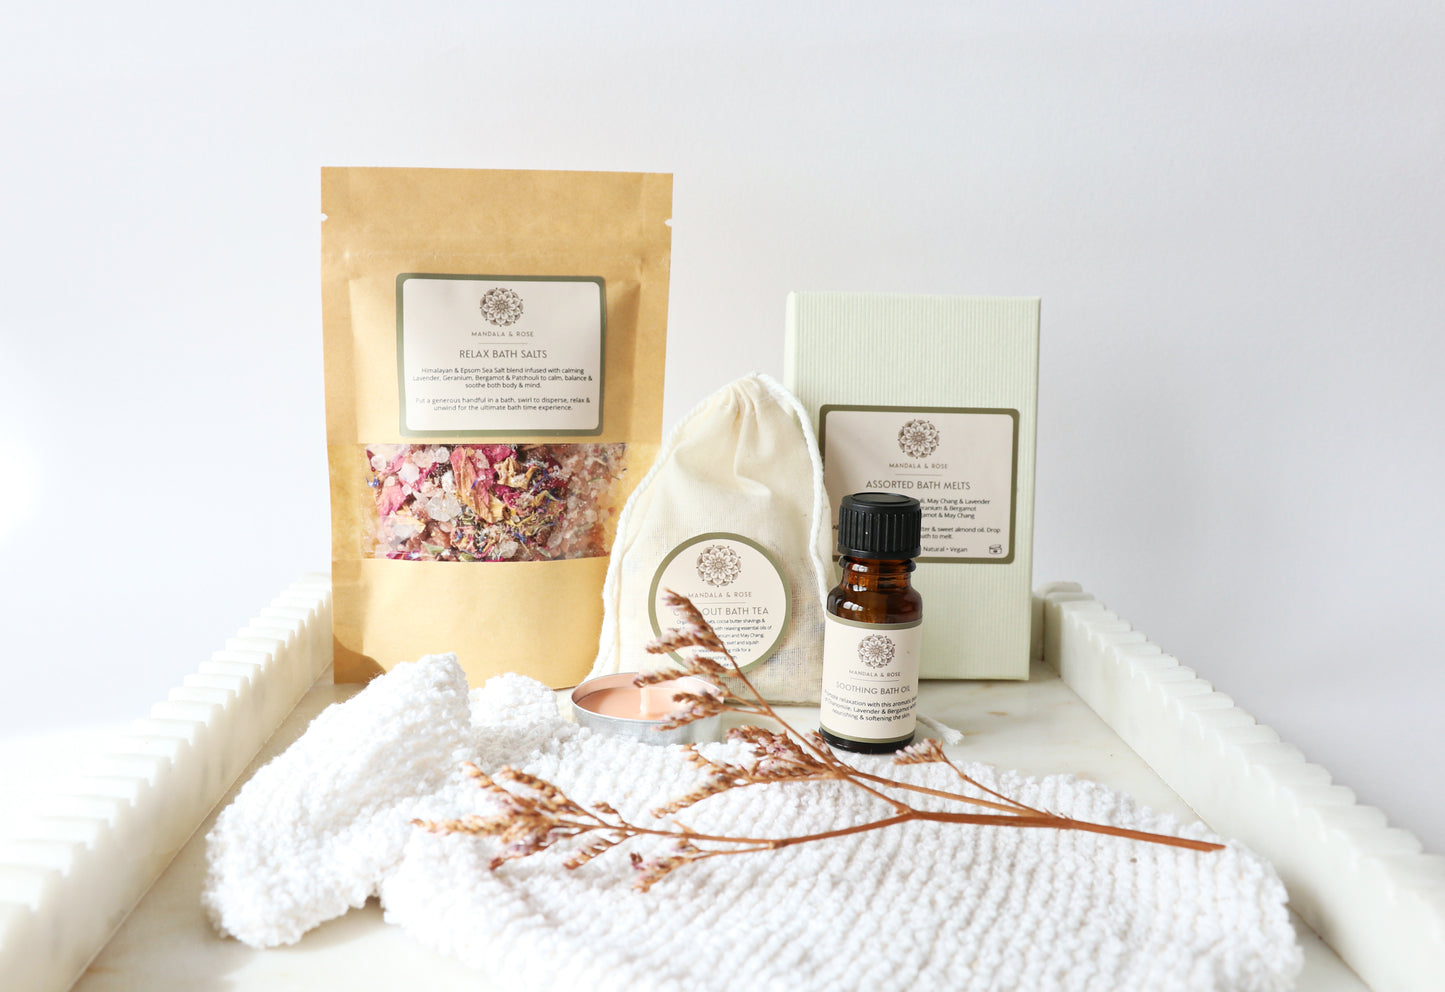 Luxury Bath Time Rituals Letterbox Gift